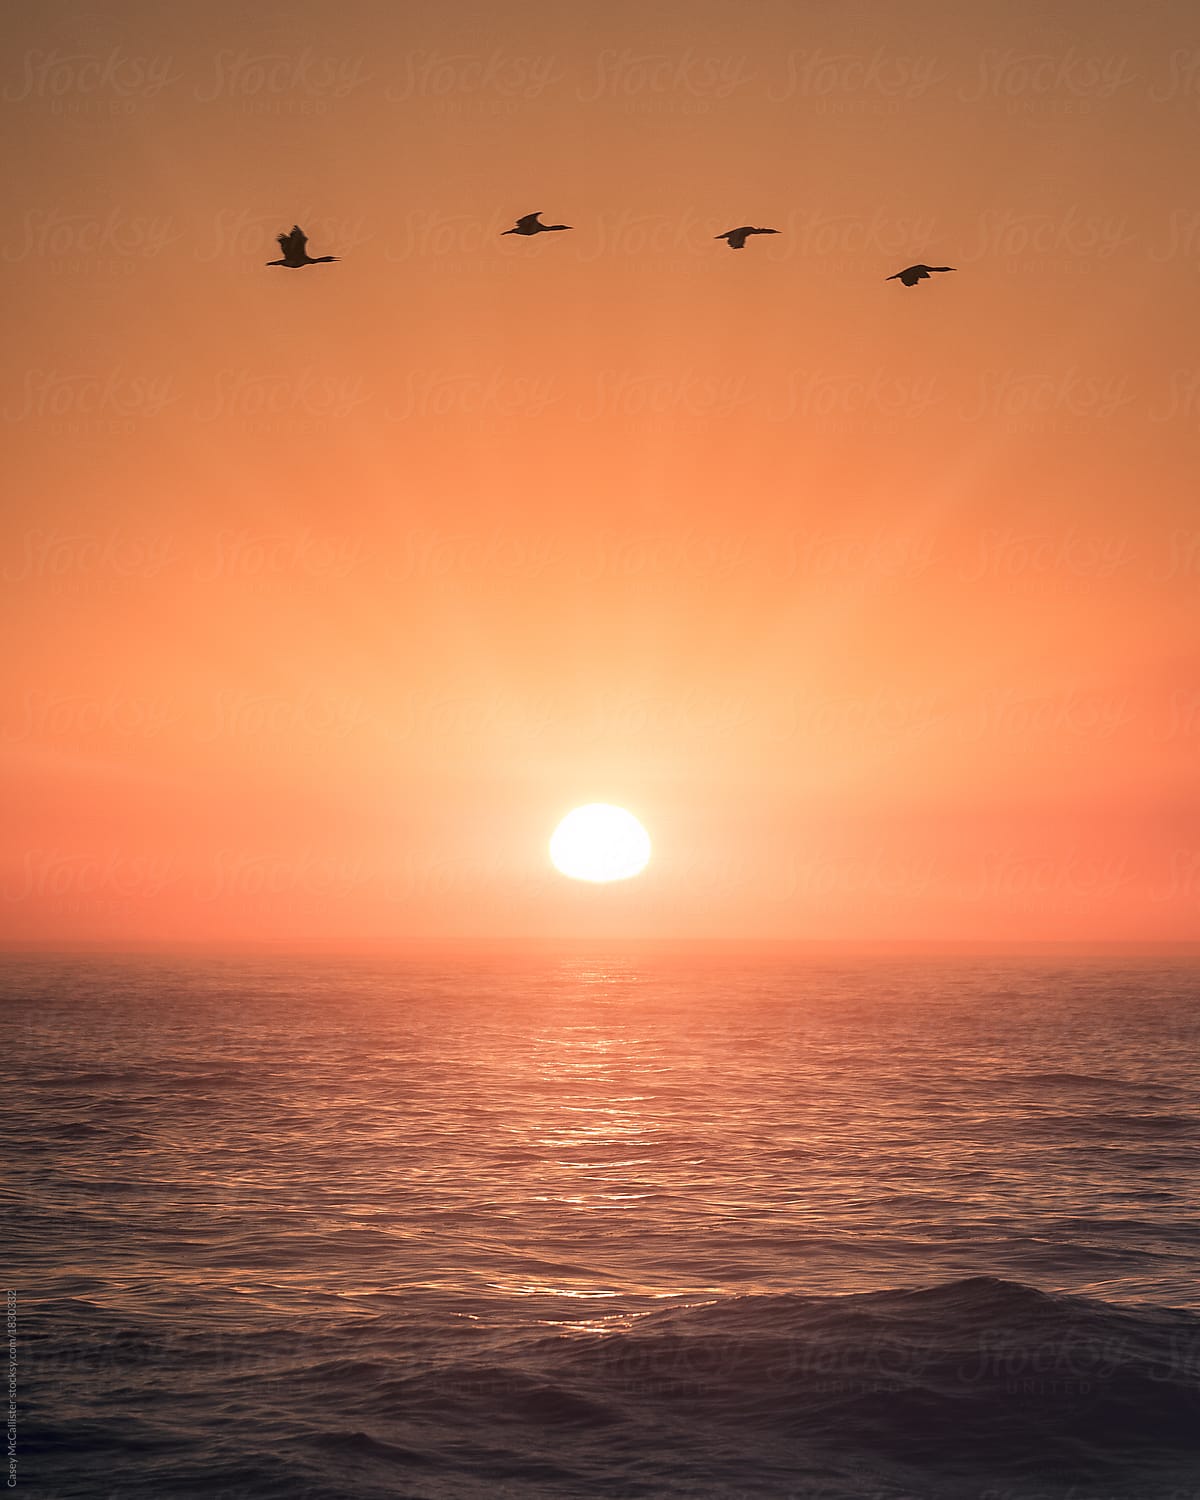 Sunset Birds Flying North by Casey McCallister Sunset